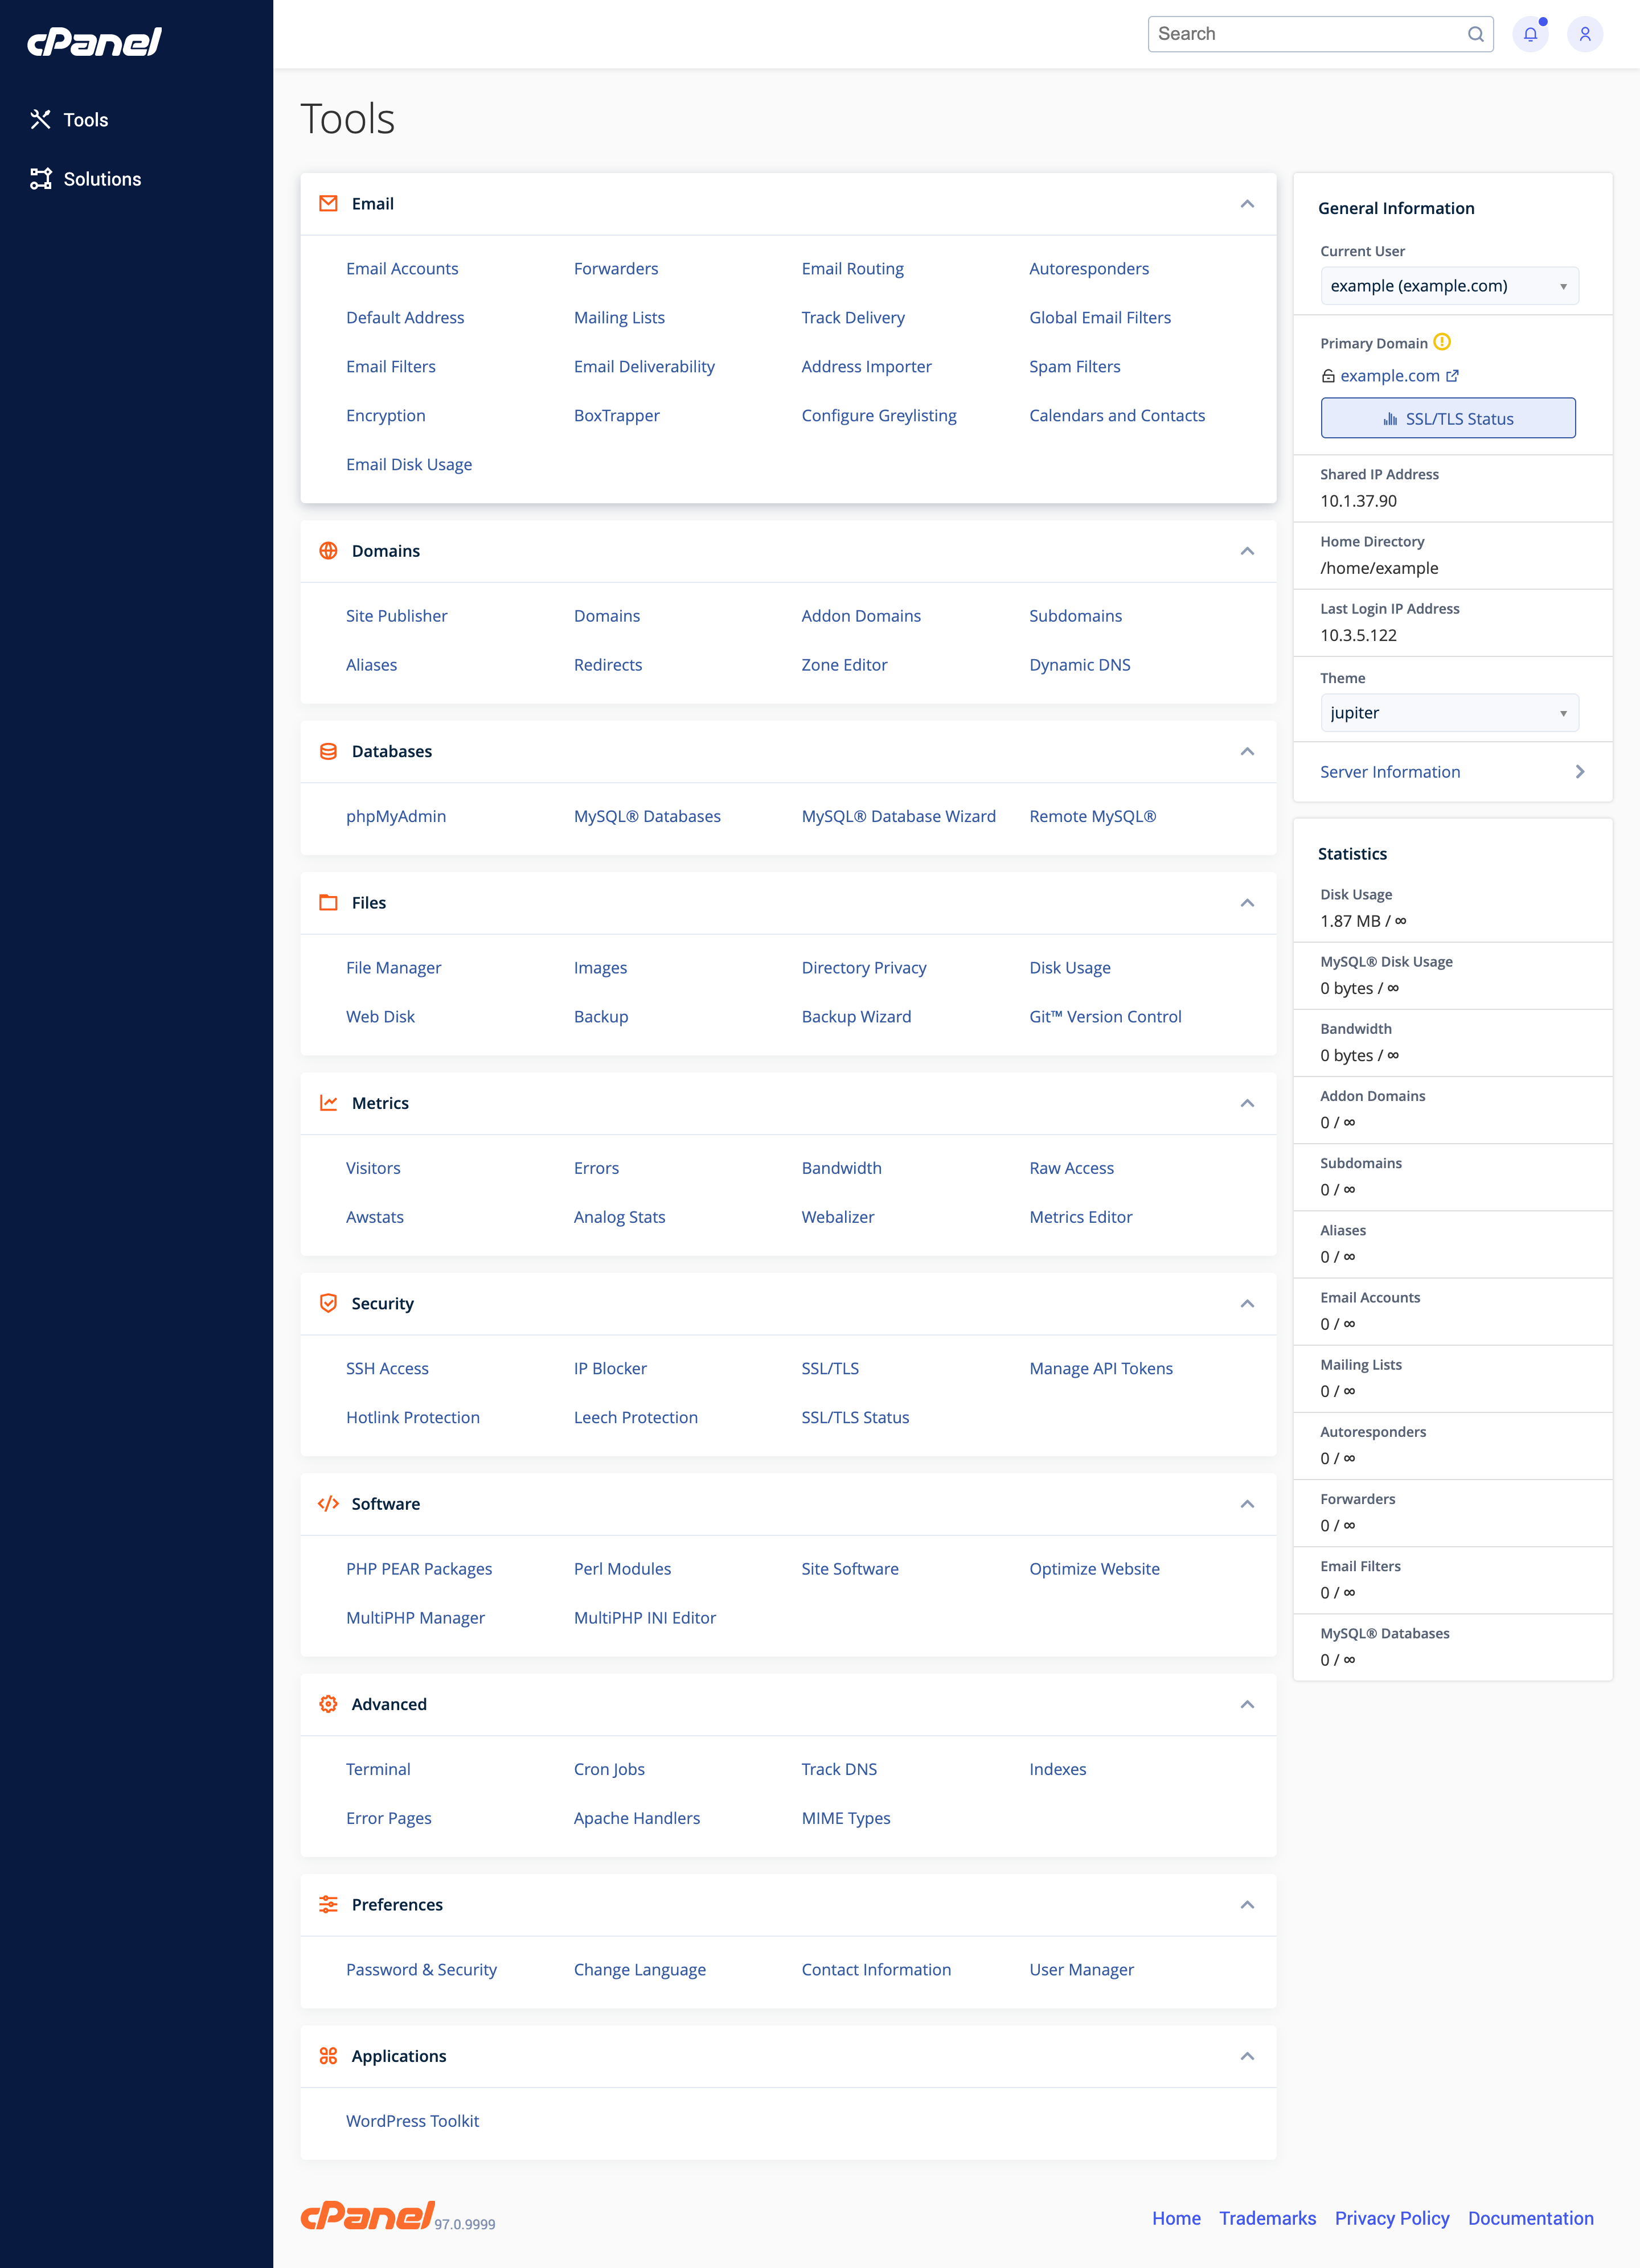 Introducing Jupiter – A New Look For cPanel